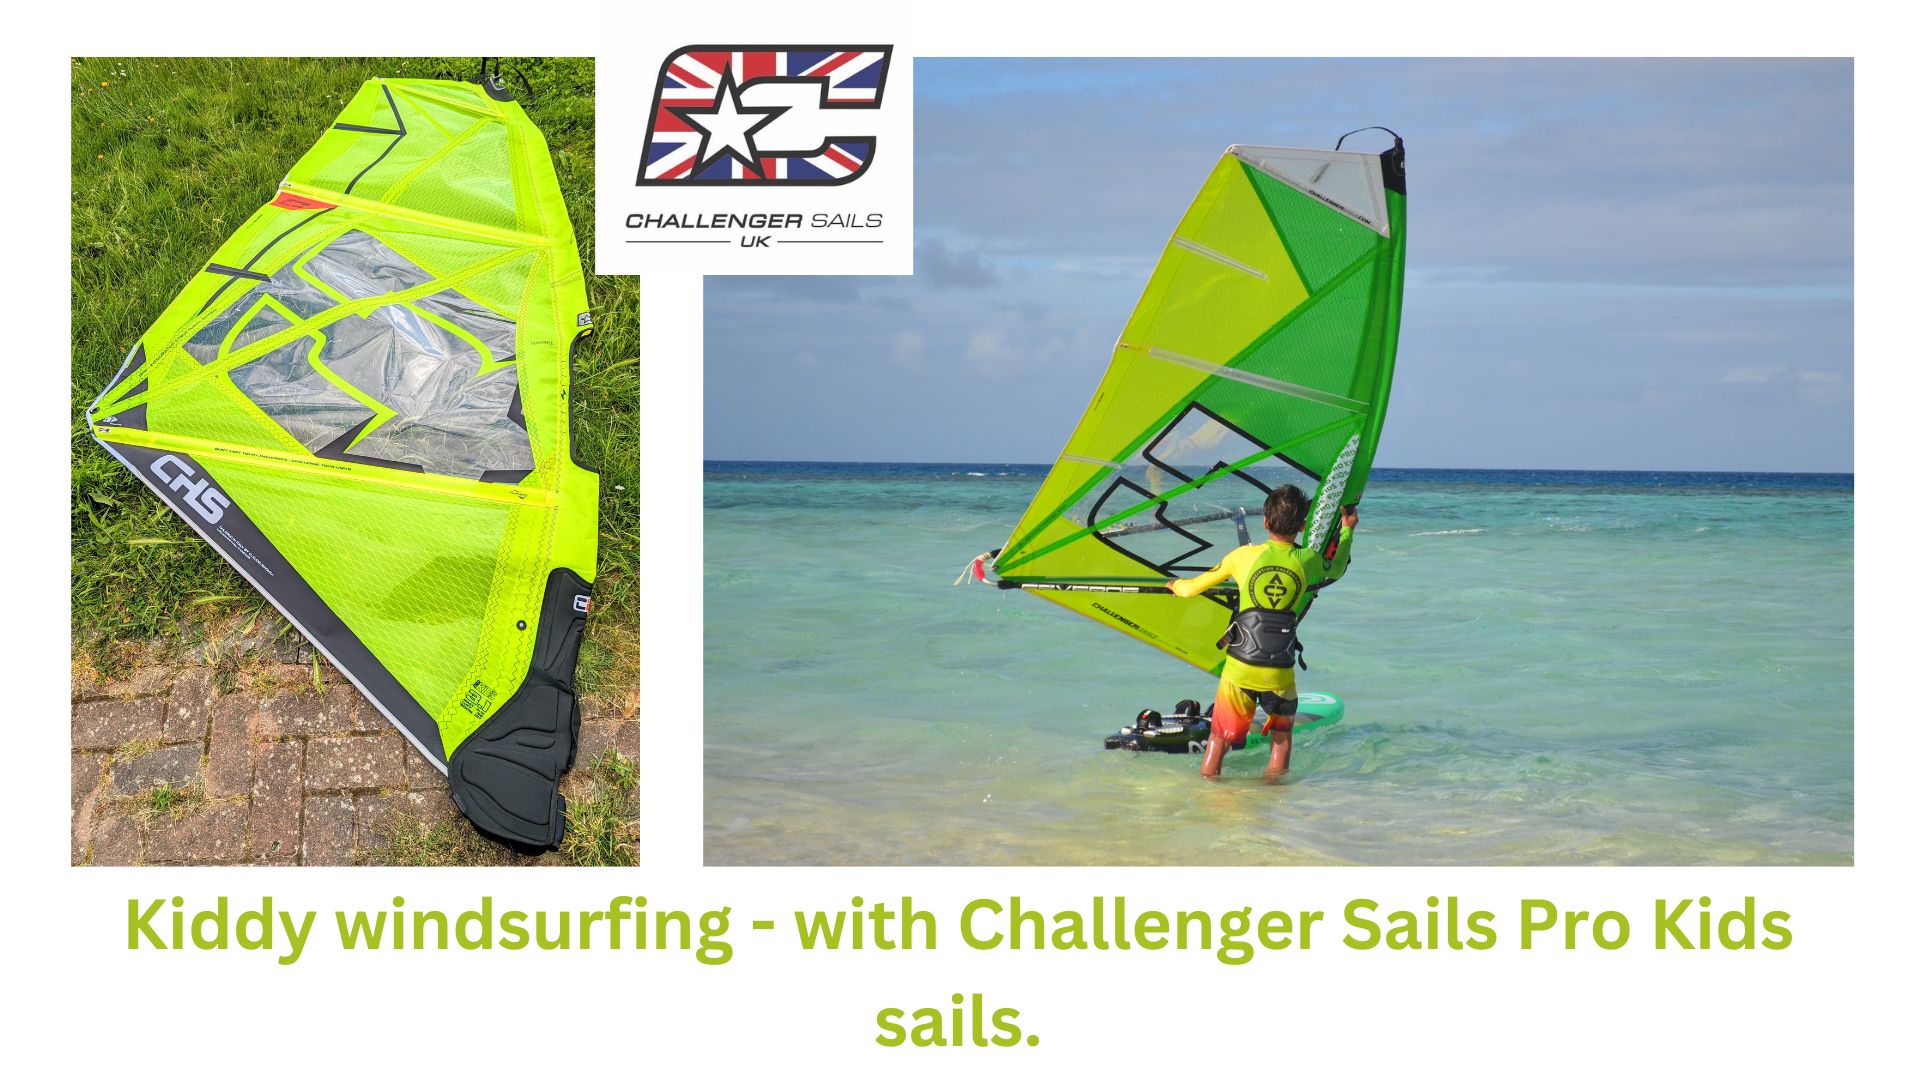 Kiddy windsurfing – with Challenger Sails Pro Kids sails.